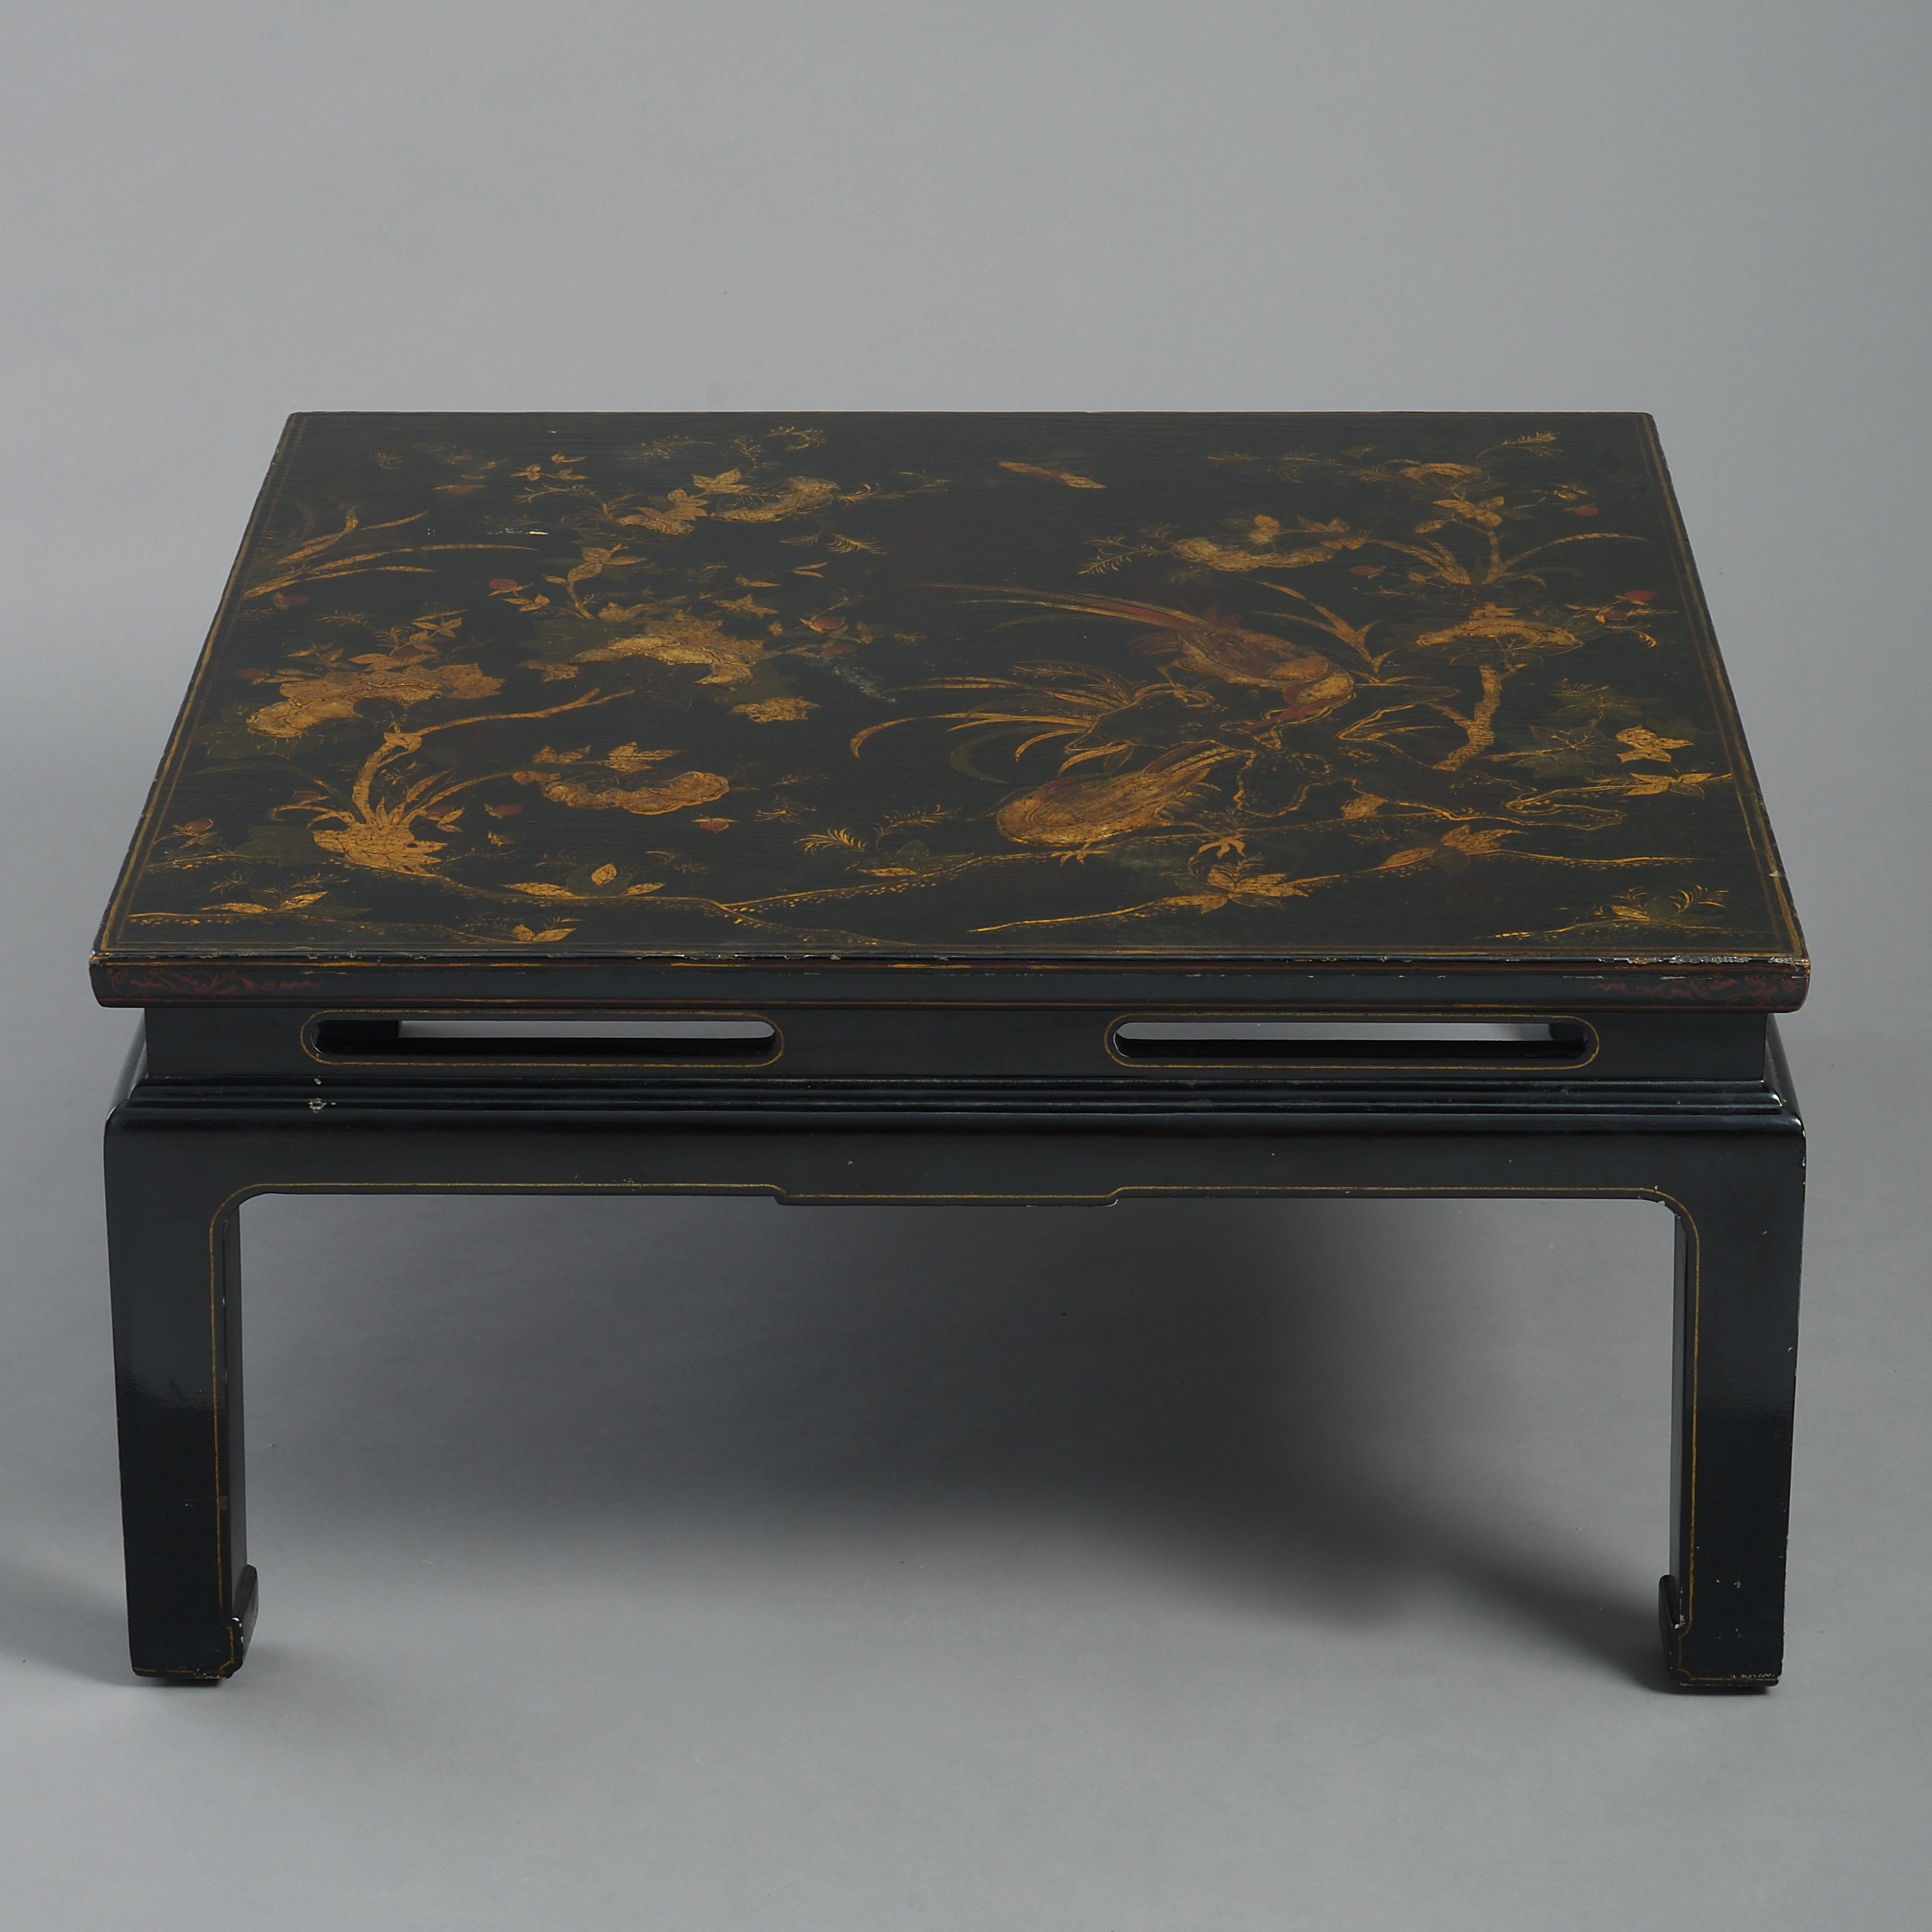 A mid-20th century black and gold japanned chinoiserie low table, the top of square form and profusely decorated with exotic birds and flowers, set upon a base, constructed in the Chinese manner.